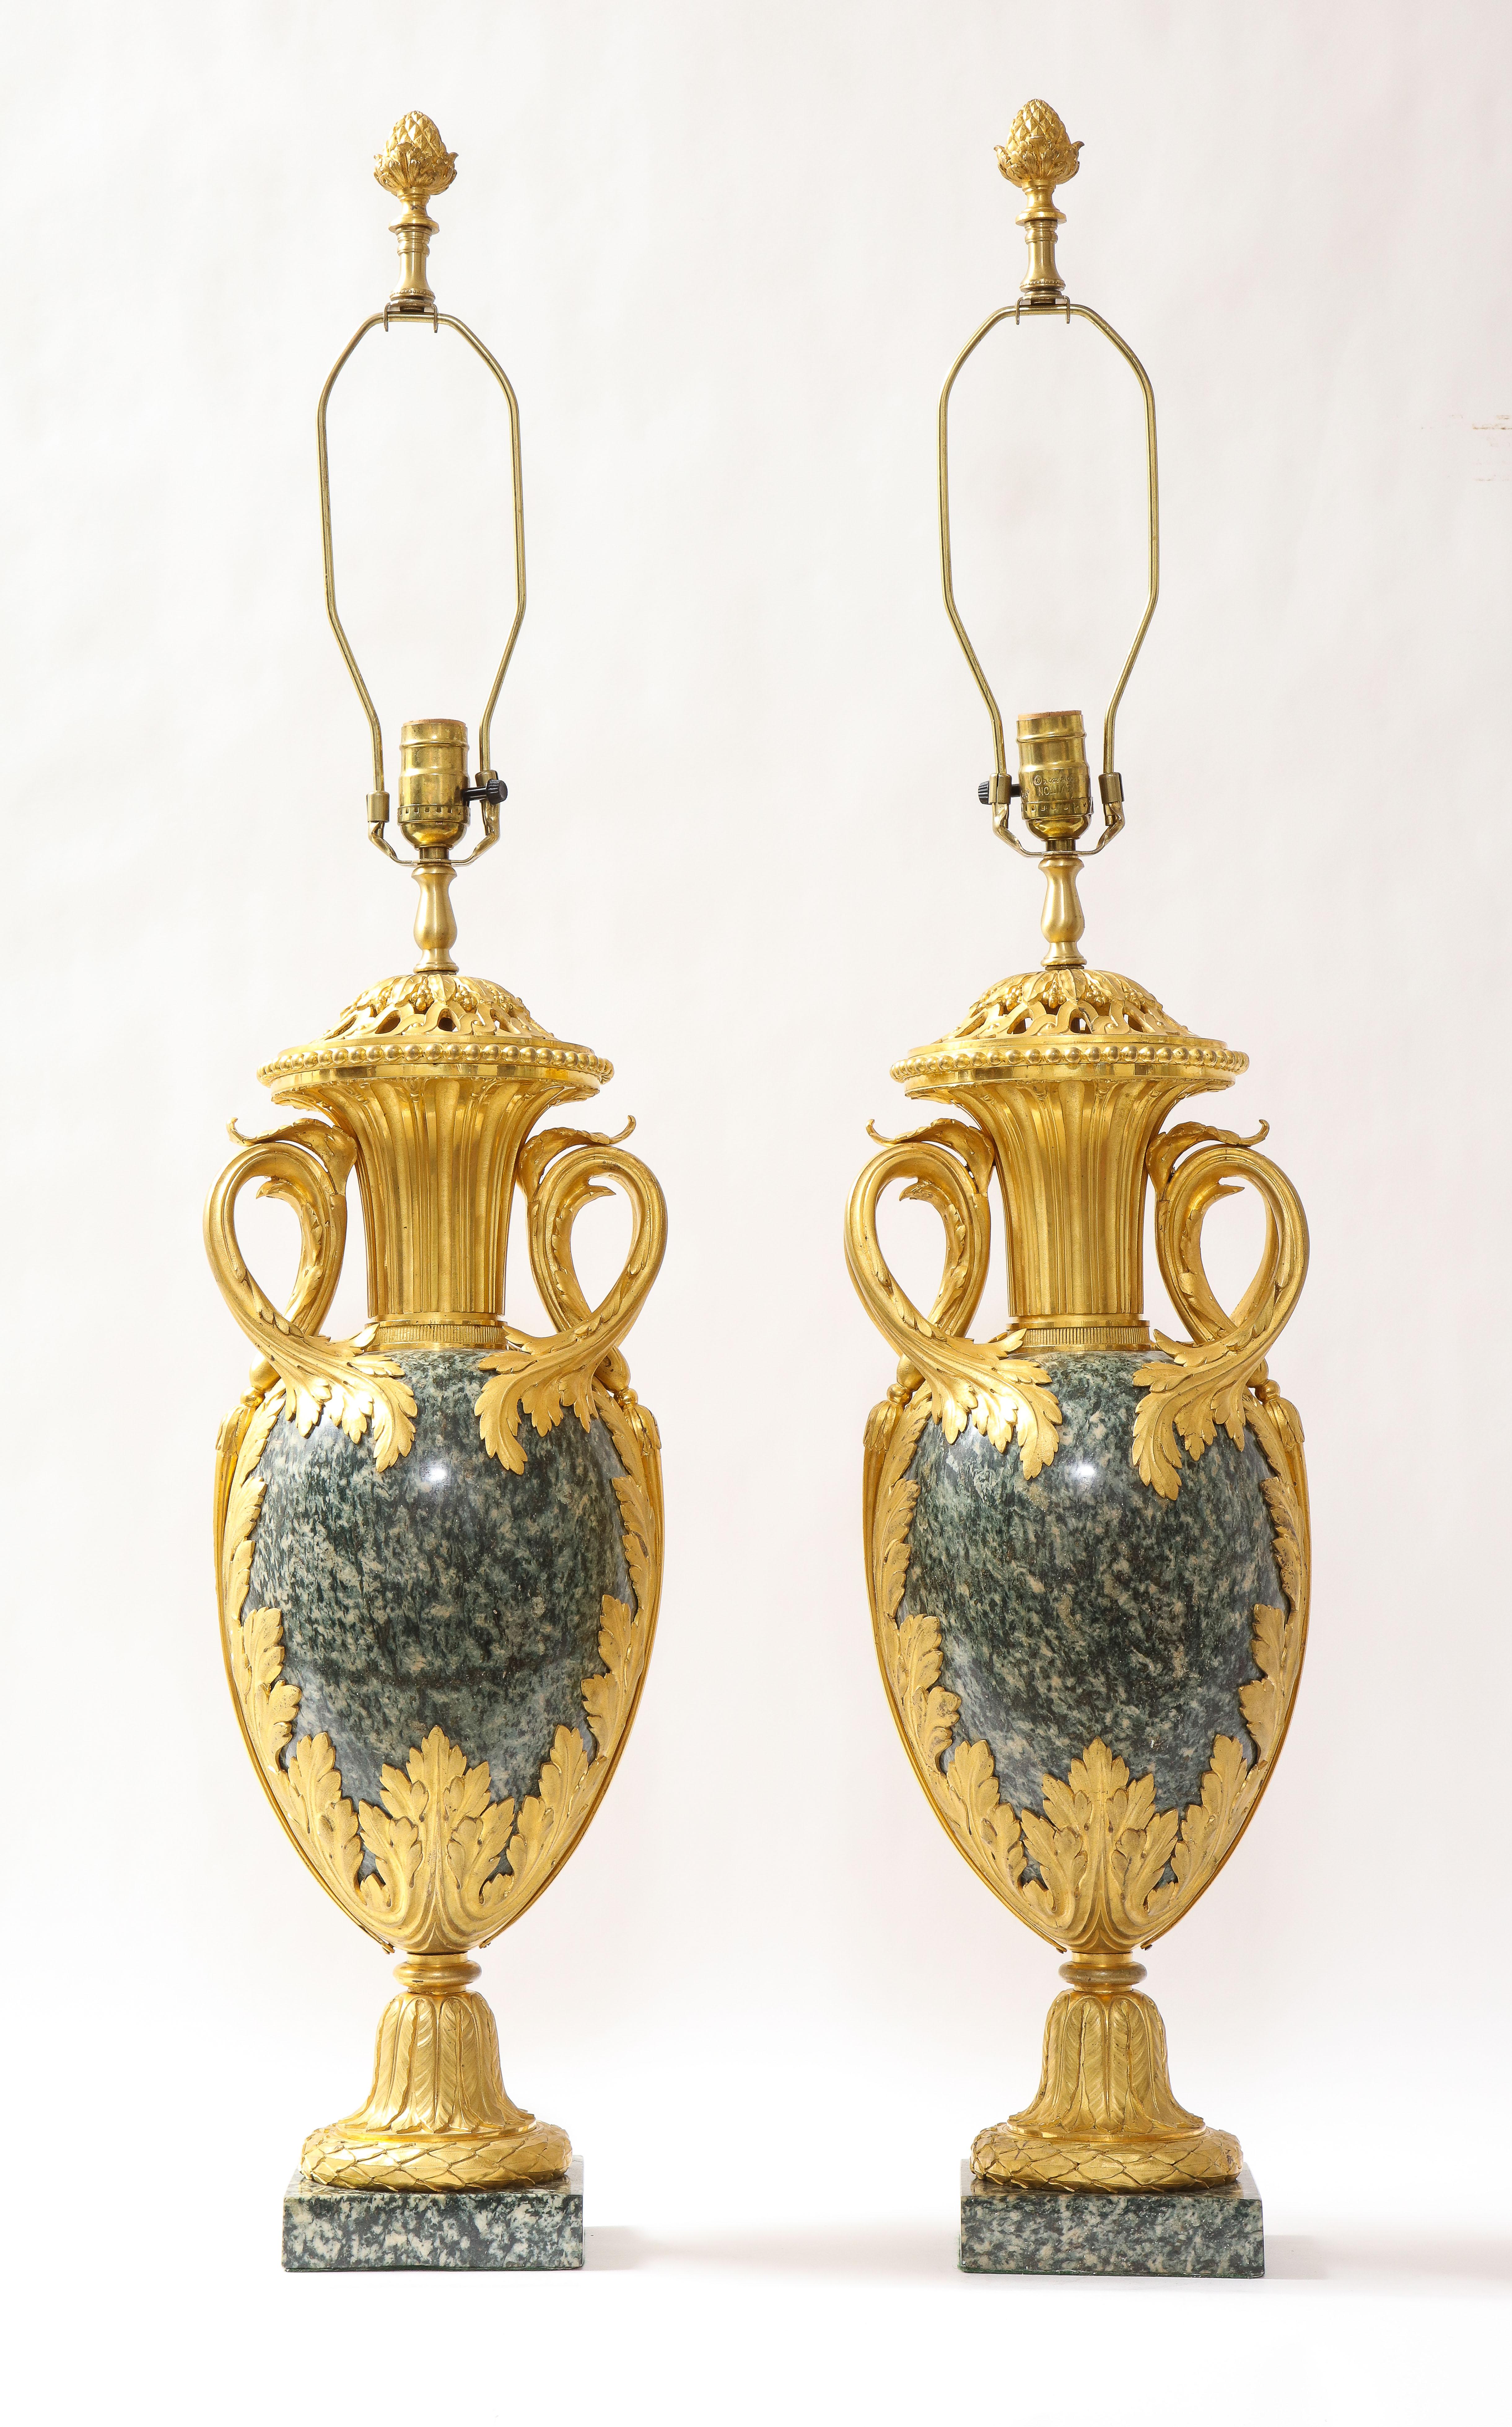 A fantastic and quite large pair of French Louis XVI style dore bronze mounted green marble or possibly Greenish/Grey Porphyry Pot-Pourri vases mounted as lamps, attributed to Henry Dasson. The bronze mounts are fabulously cast, hand-chiseled, and